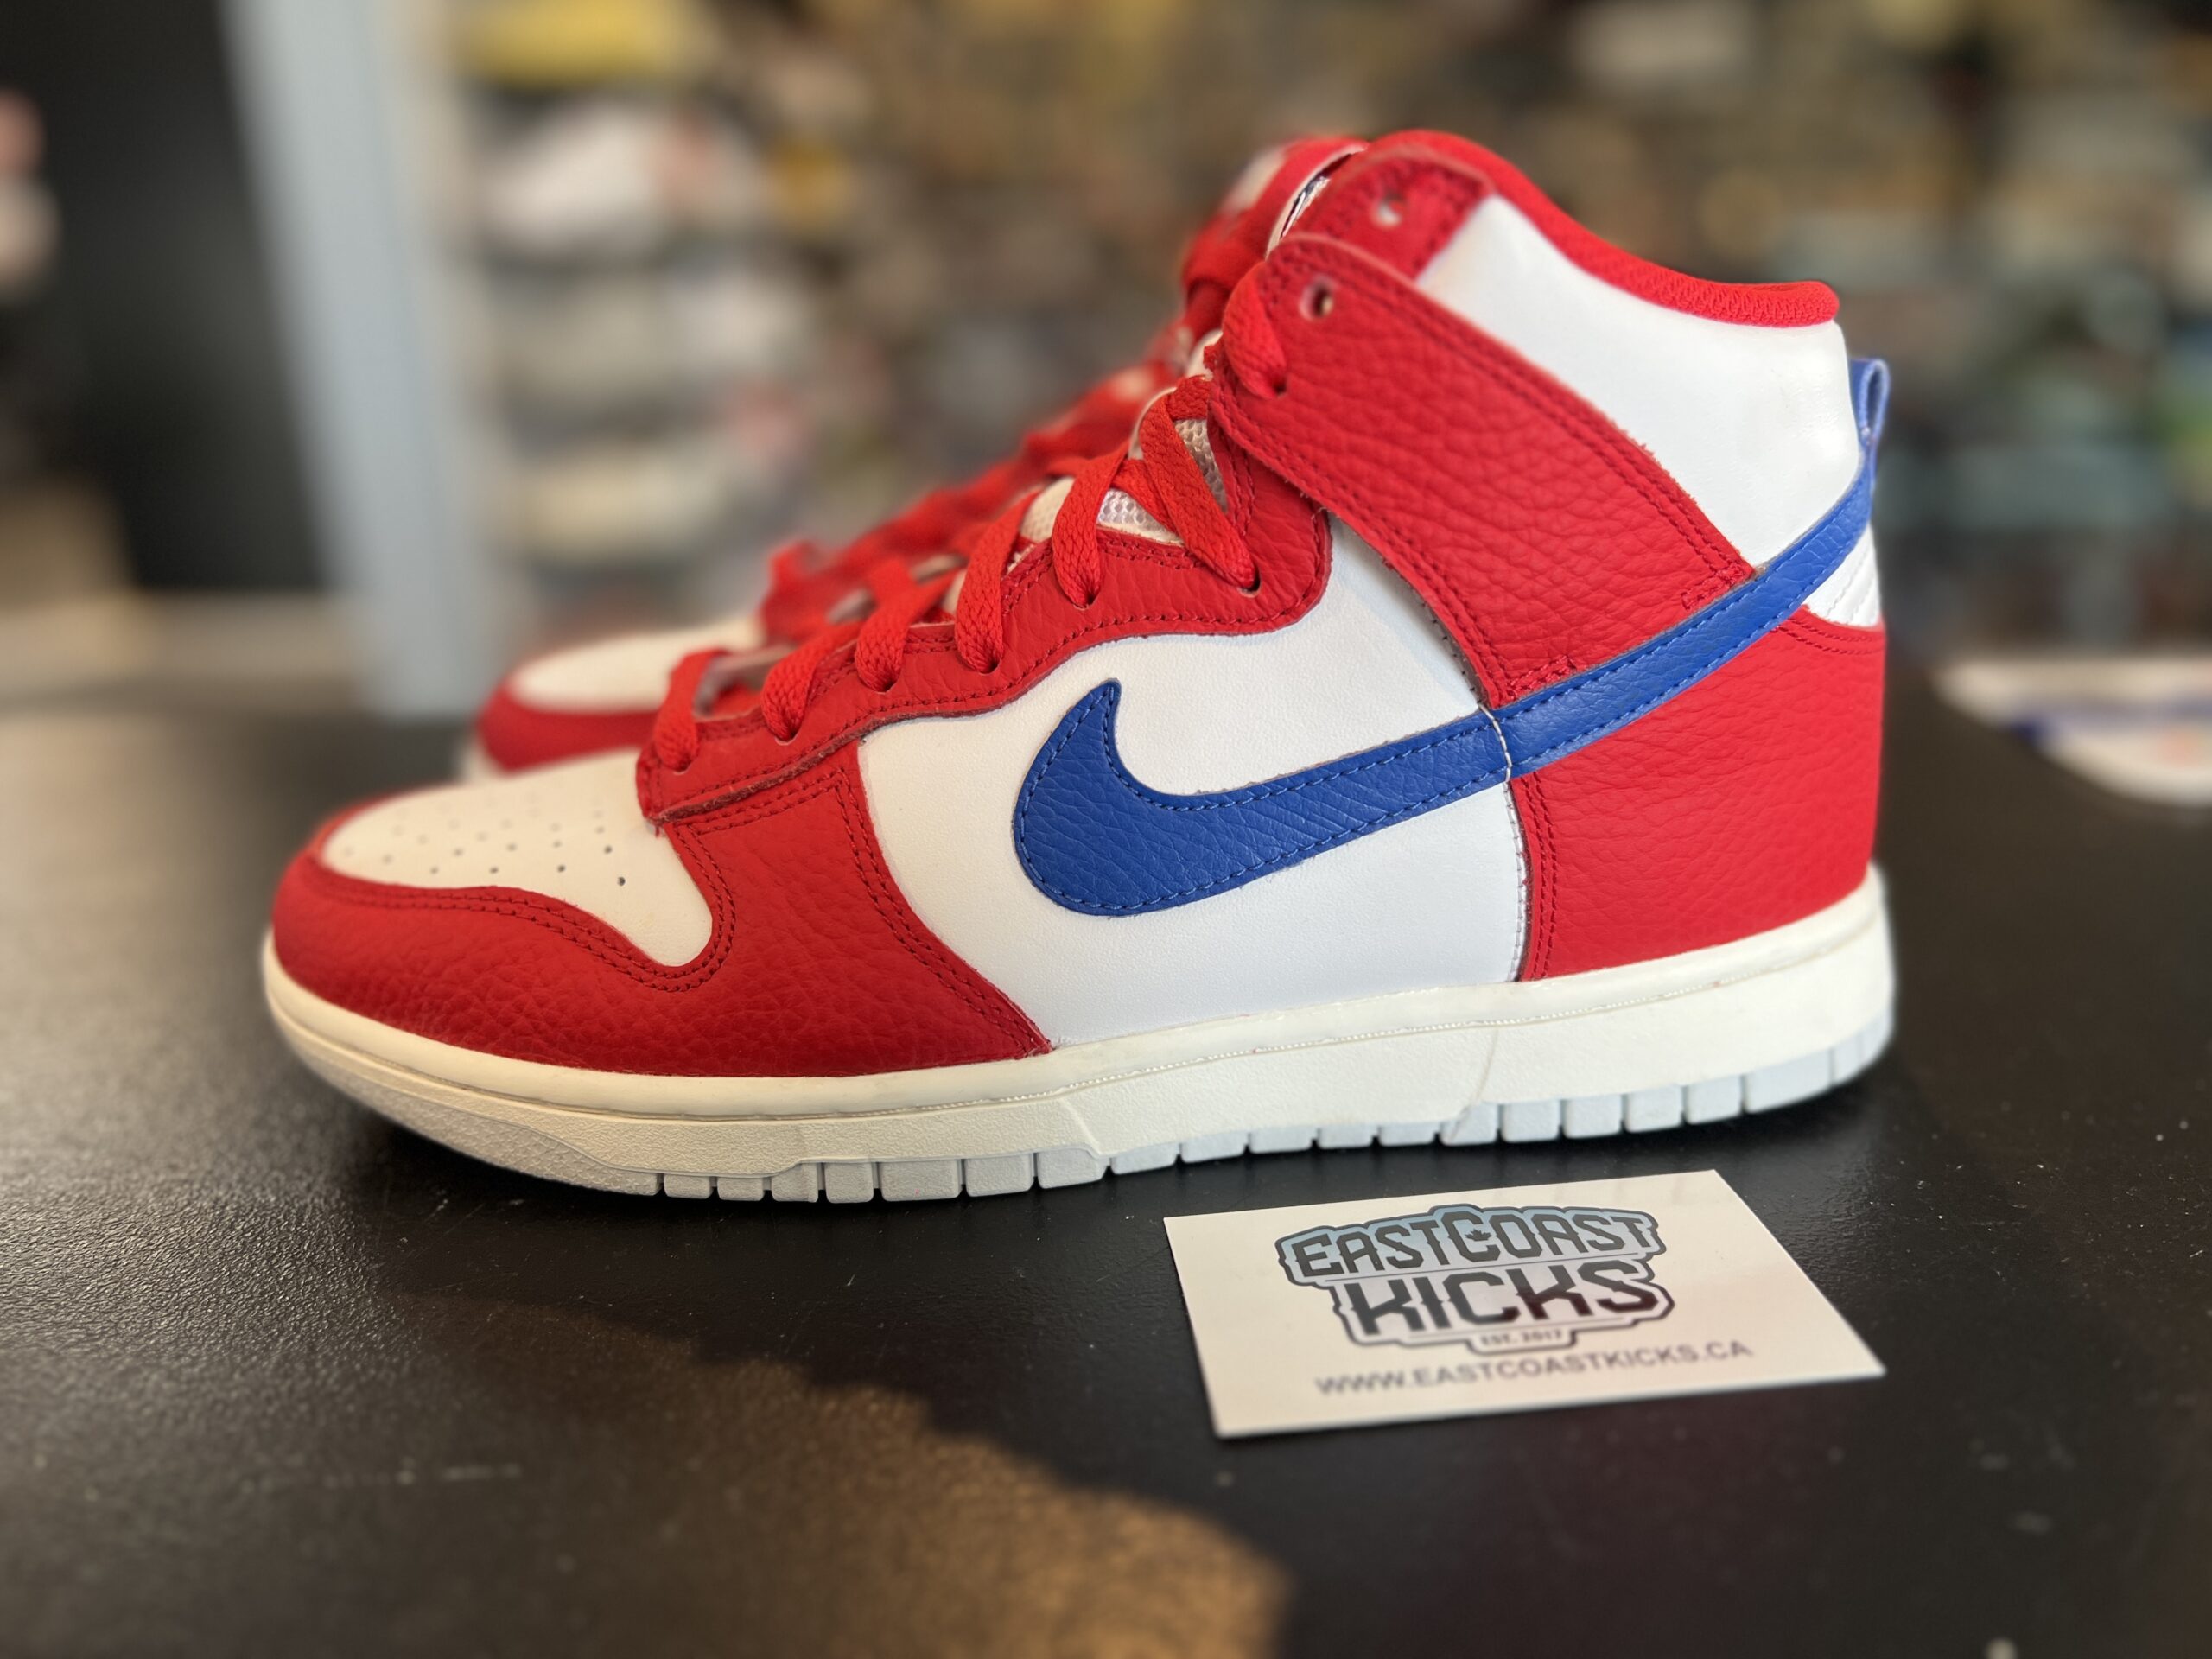 Preowned Nike Dunk High 4th of July Size 9